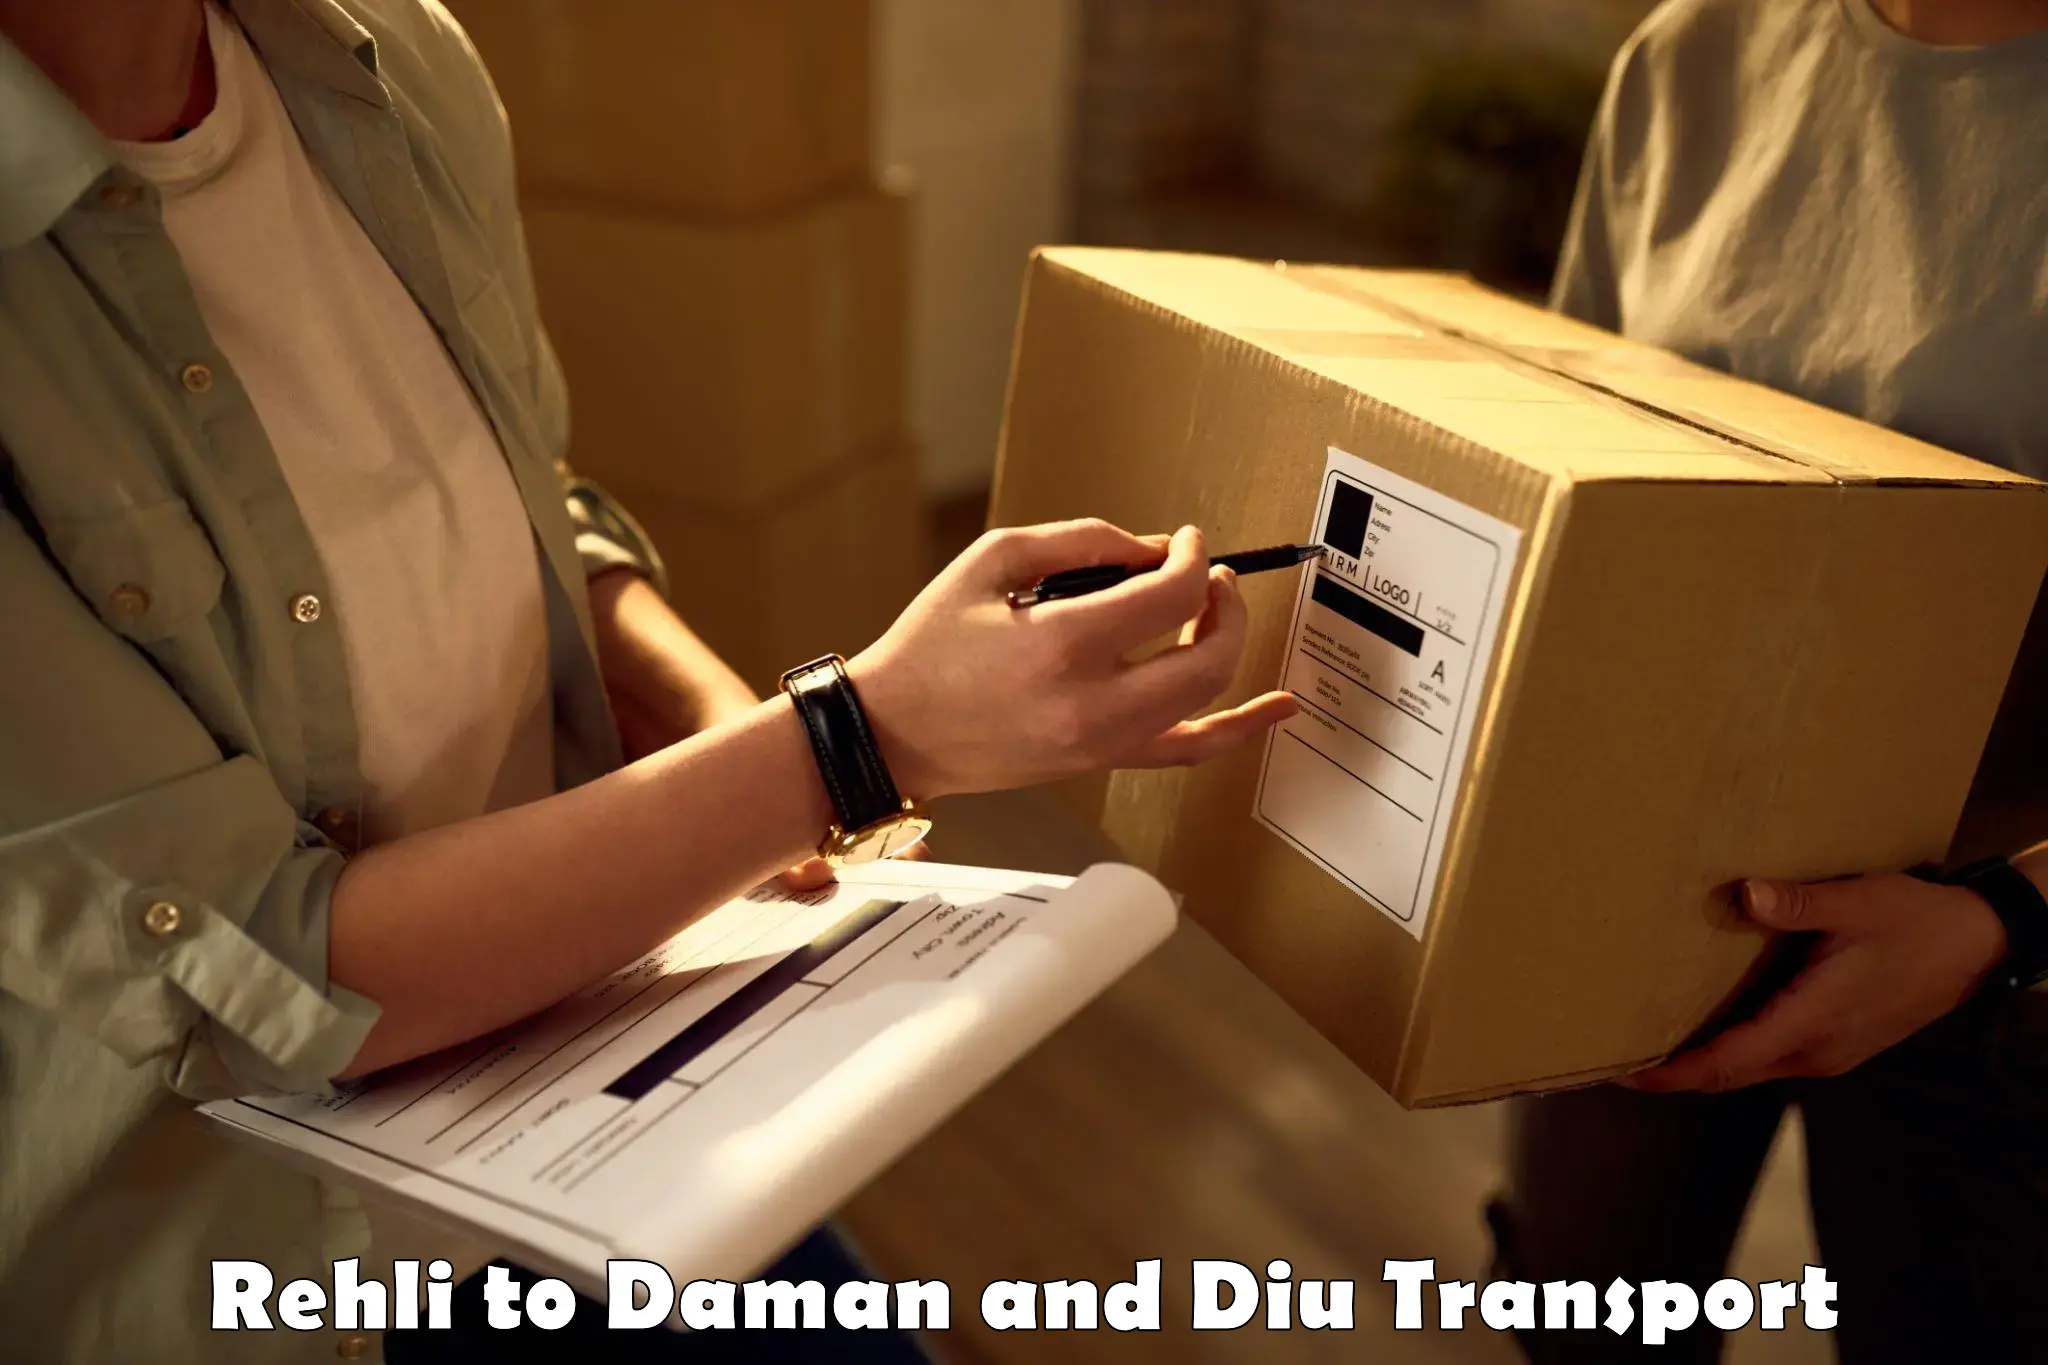 Daily transport service Rehli to Daman and Diu